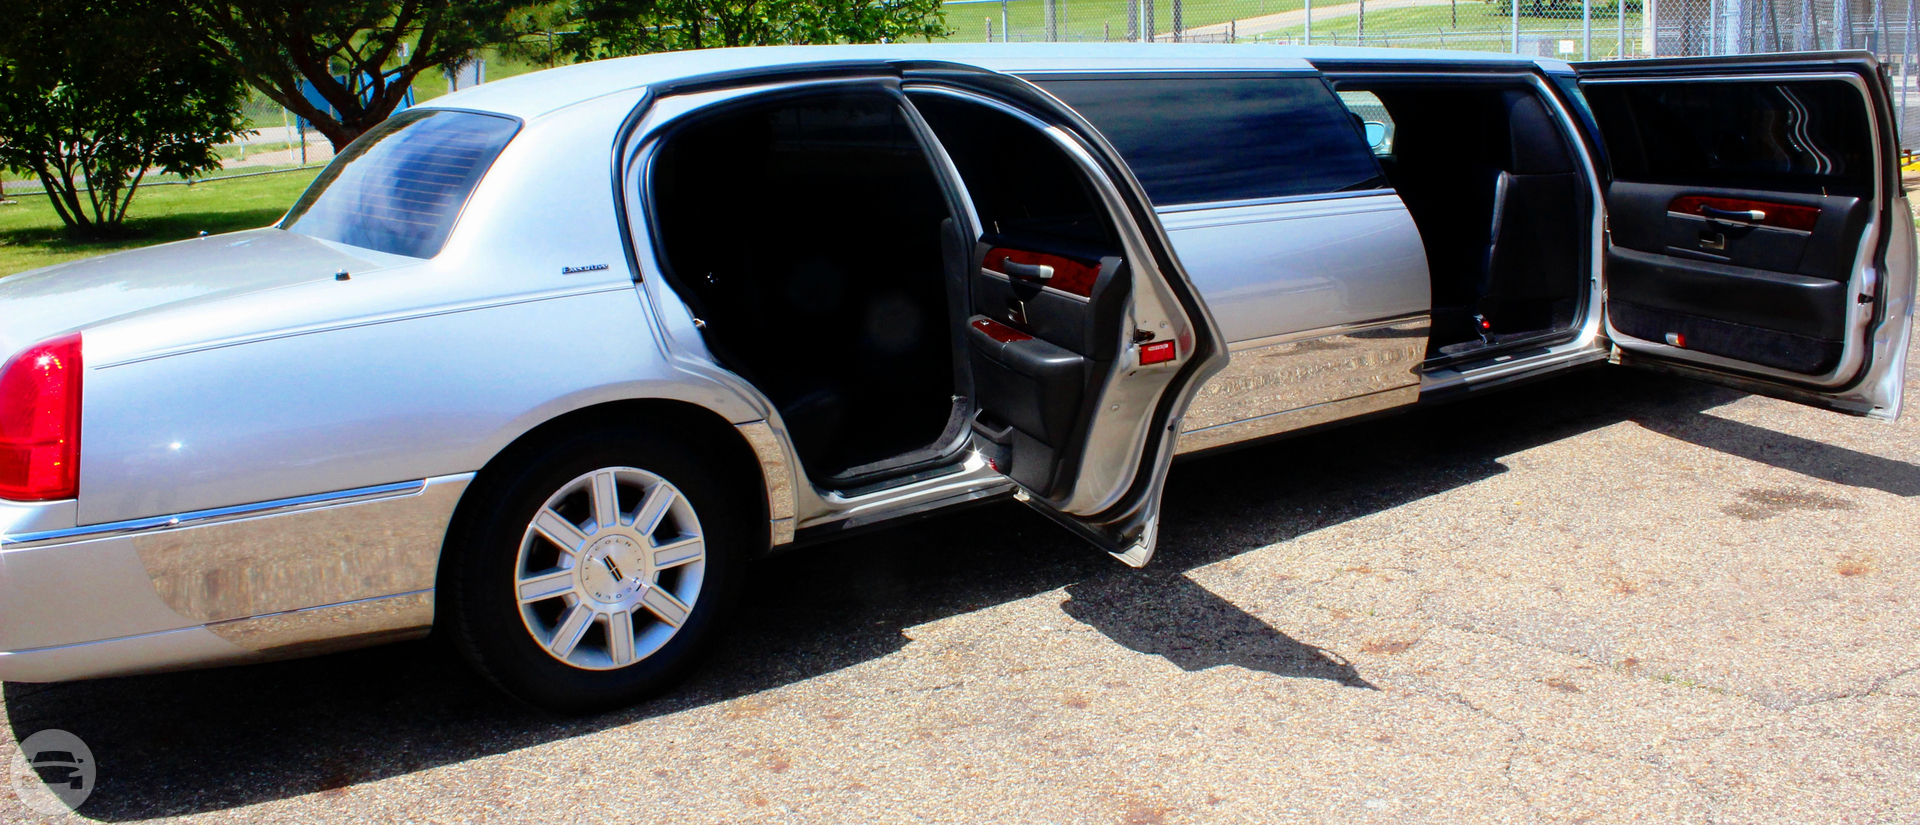 10 Passenger Lincoln Stretch Limousine - Gray
Limo /
Akron, OH

 / Hourly $0.00
